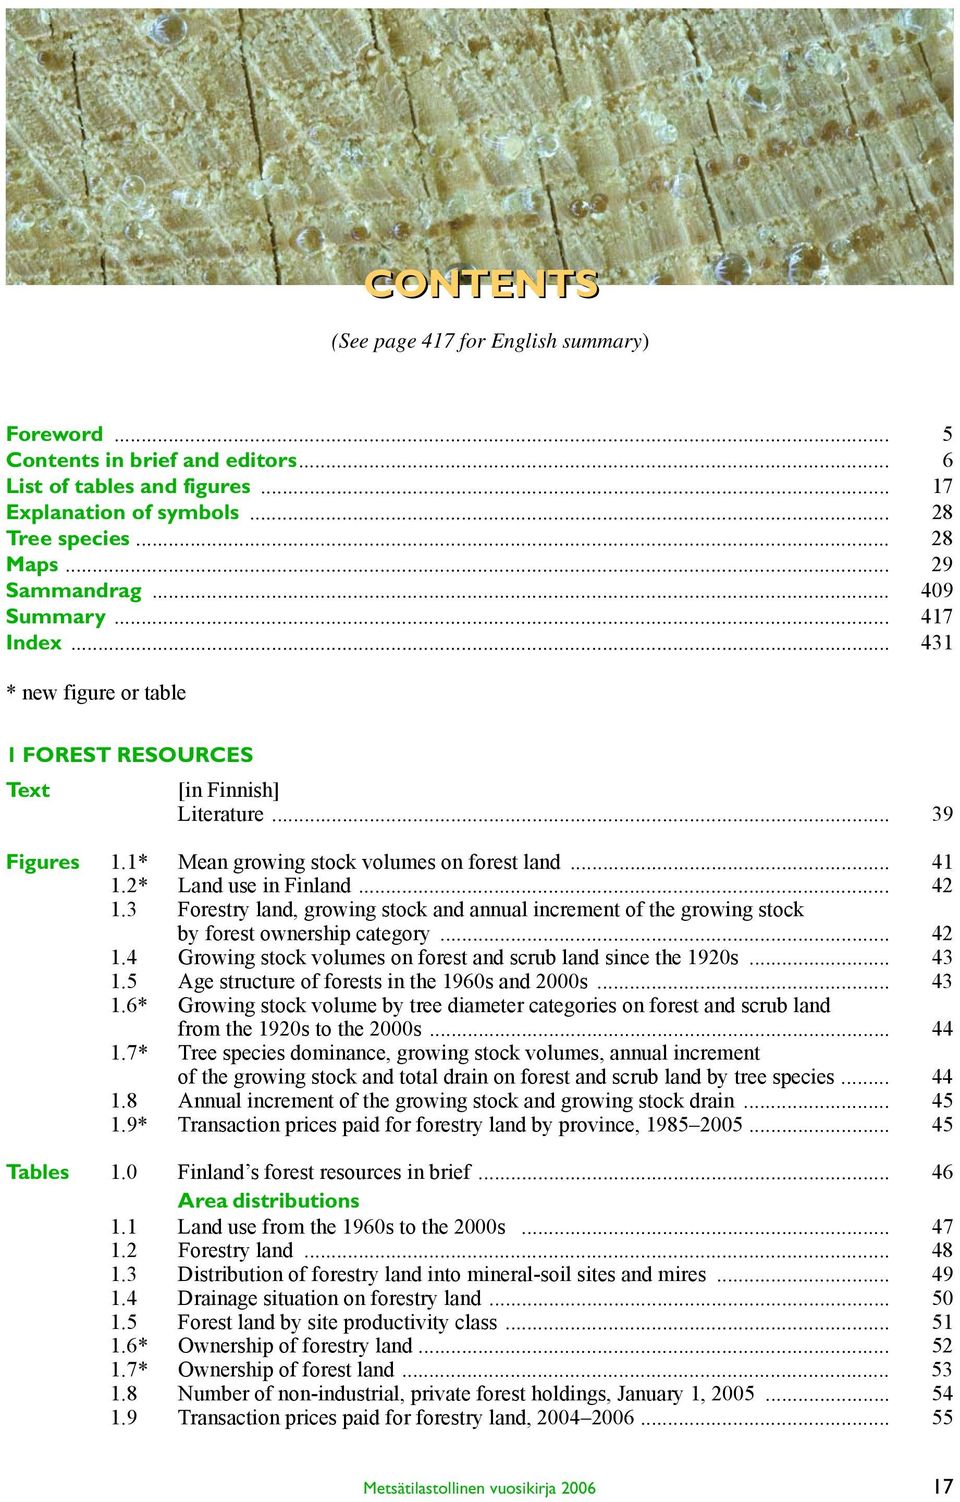 .. 42 1.3 Forestry land, growing stock and annual increment of the growing stock by forest ownership category... 42 1.4 Growing stock volumes on forest and scrub land since the 1920s... 43 1.